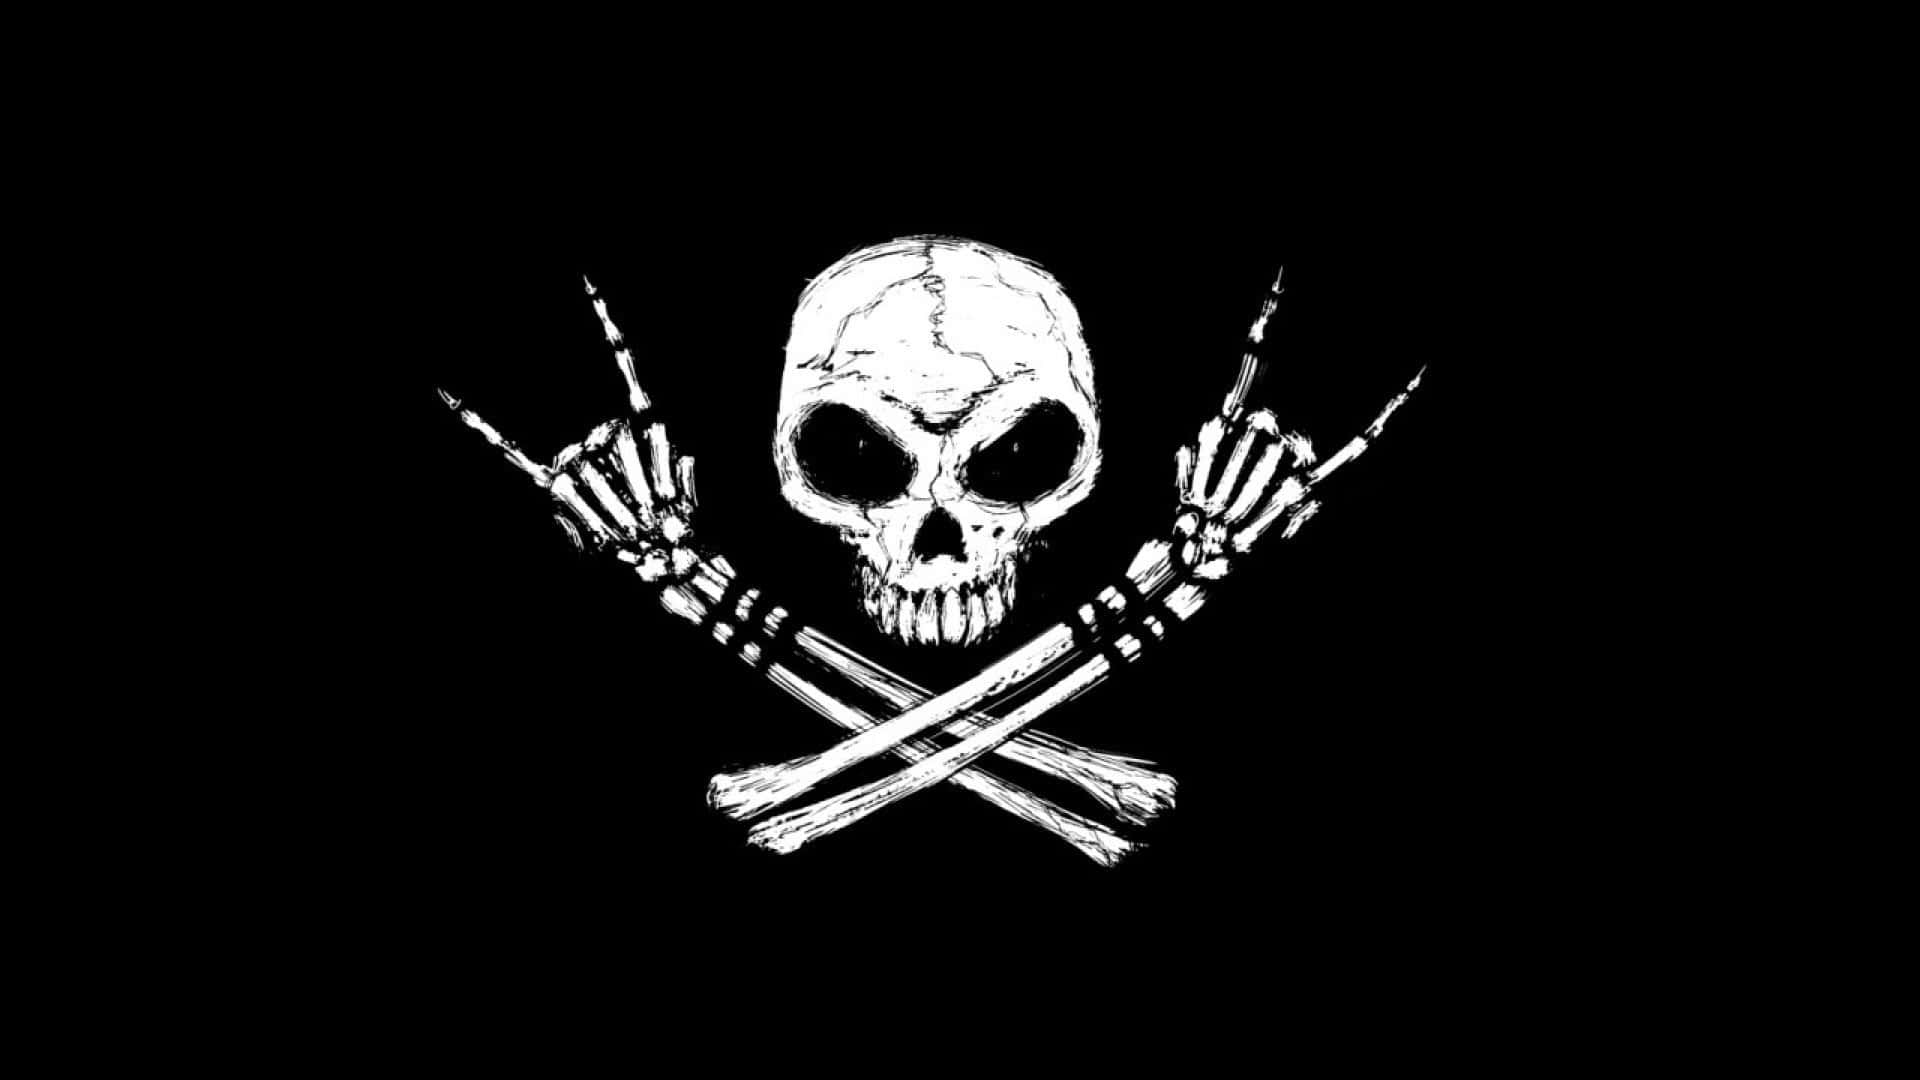 A Skull With Two Crossed Fingers On A Black Background